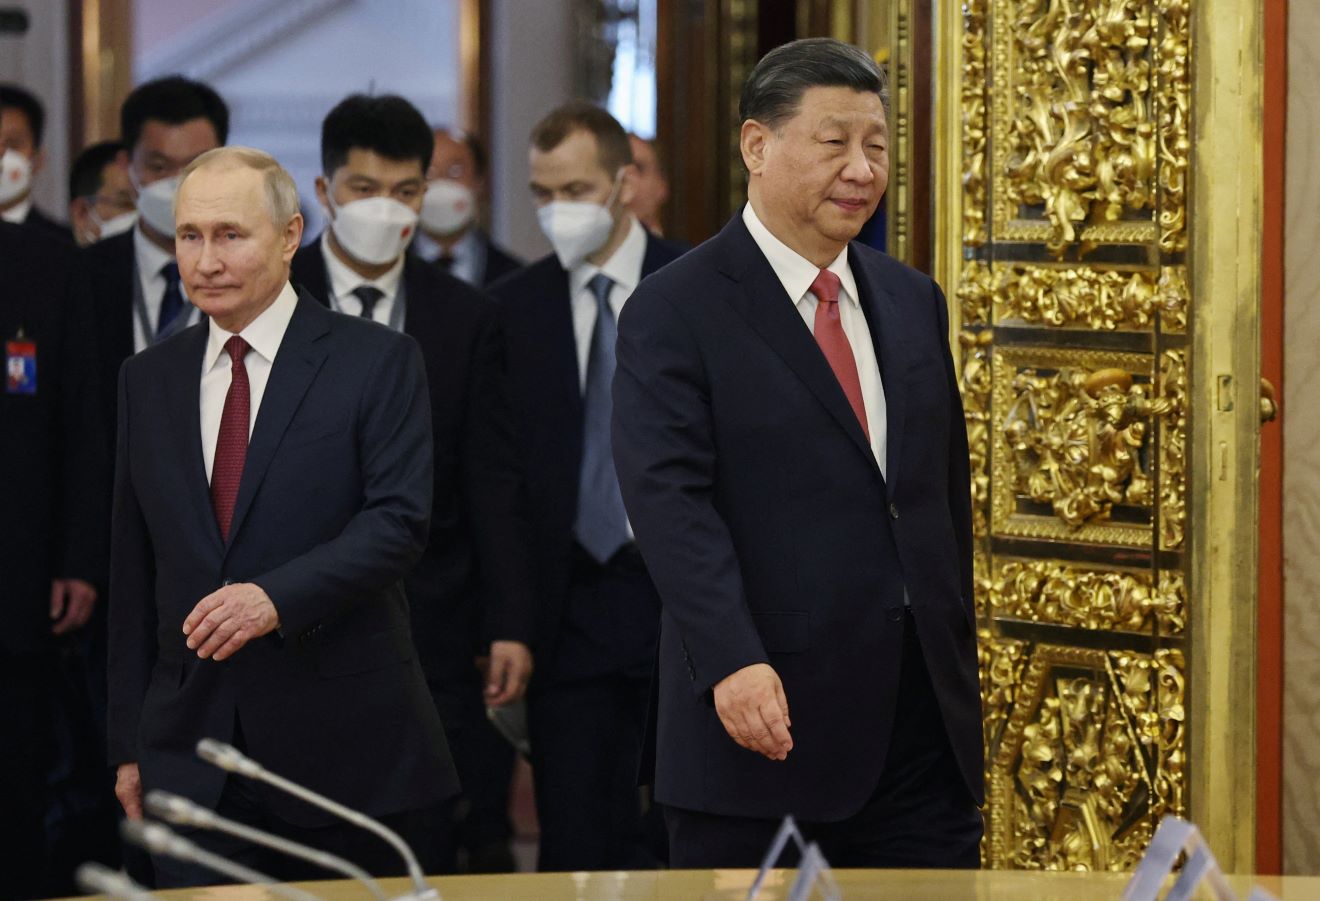 Russian President Vladimir Putin turns to his right and Chinese President Xi Jinping turns to his left as they enter a room with a golden door before talks at the Kremlin in Moscow, Russia on March 21, 2023. Sputnik/Mikhail Tereshchenko/Pool via REUTERS